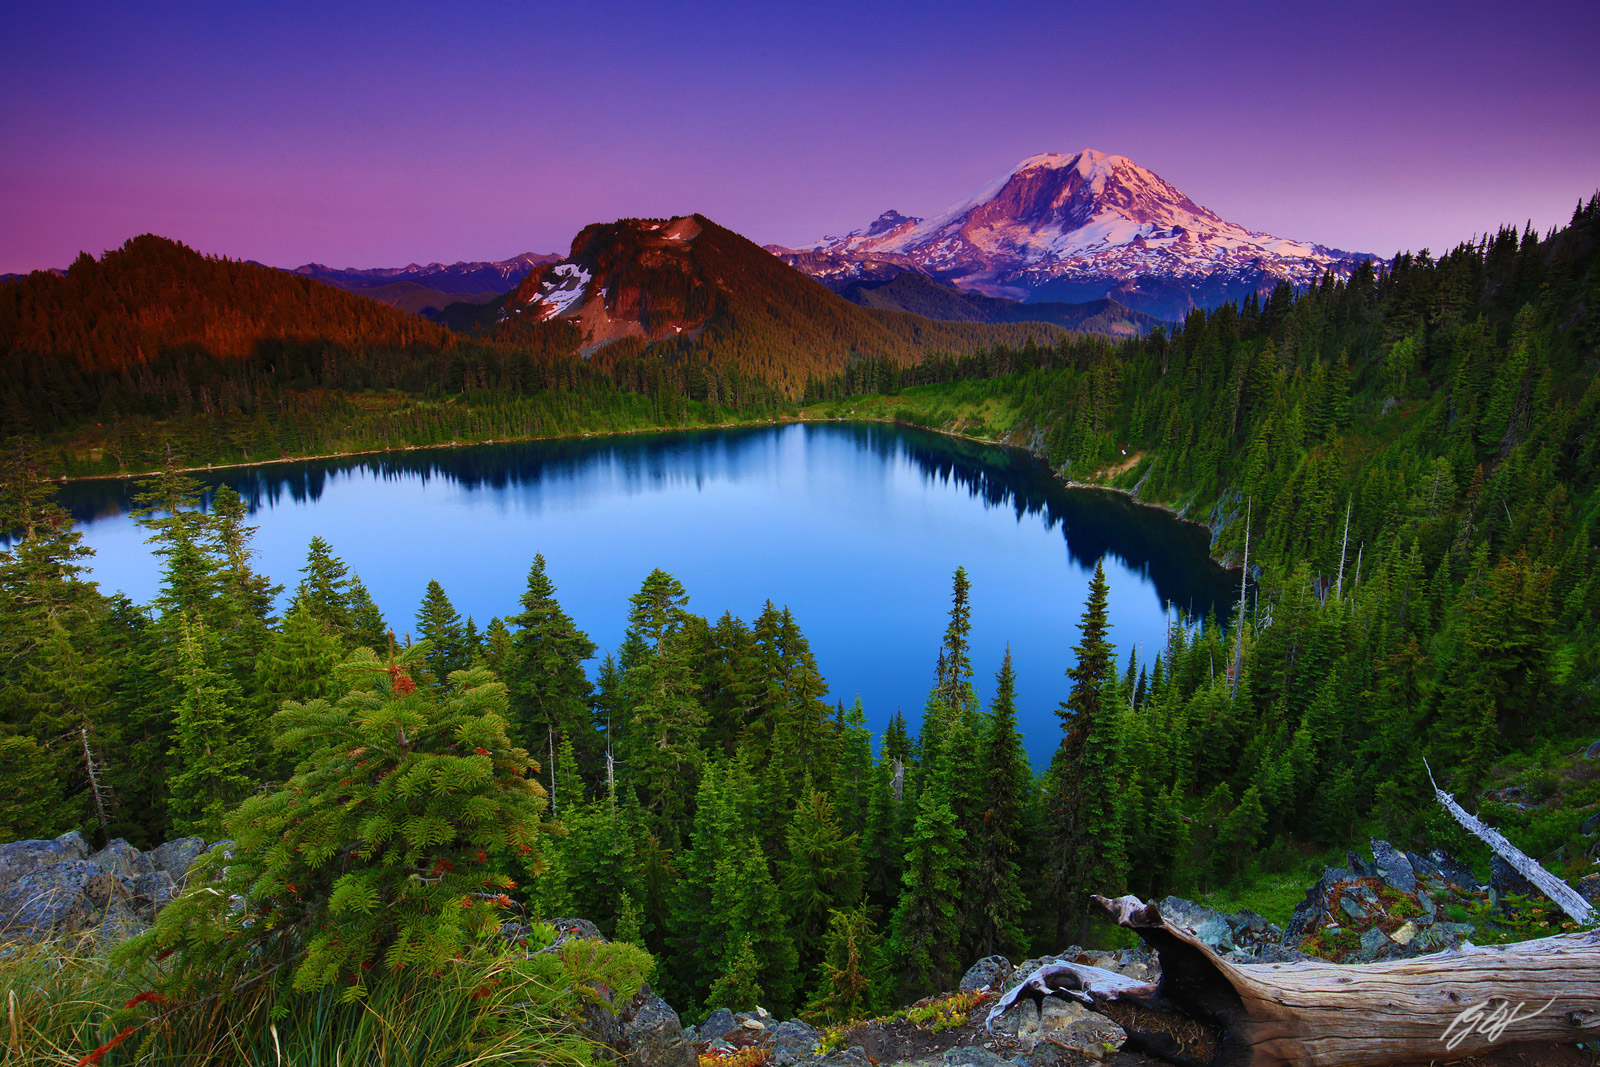 Sunset Mt Rainier over Summit Lake in the Clearwater Wilderness in Washington